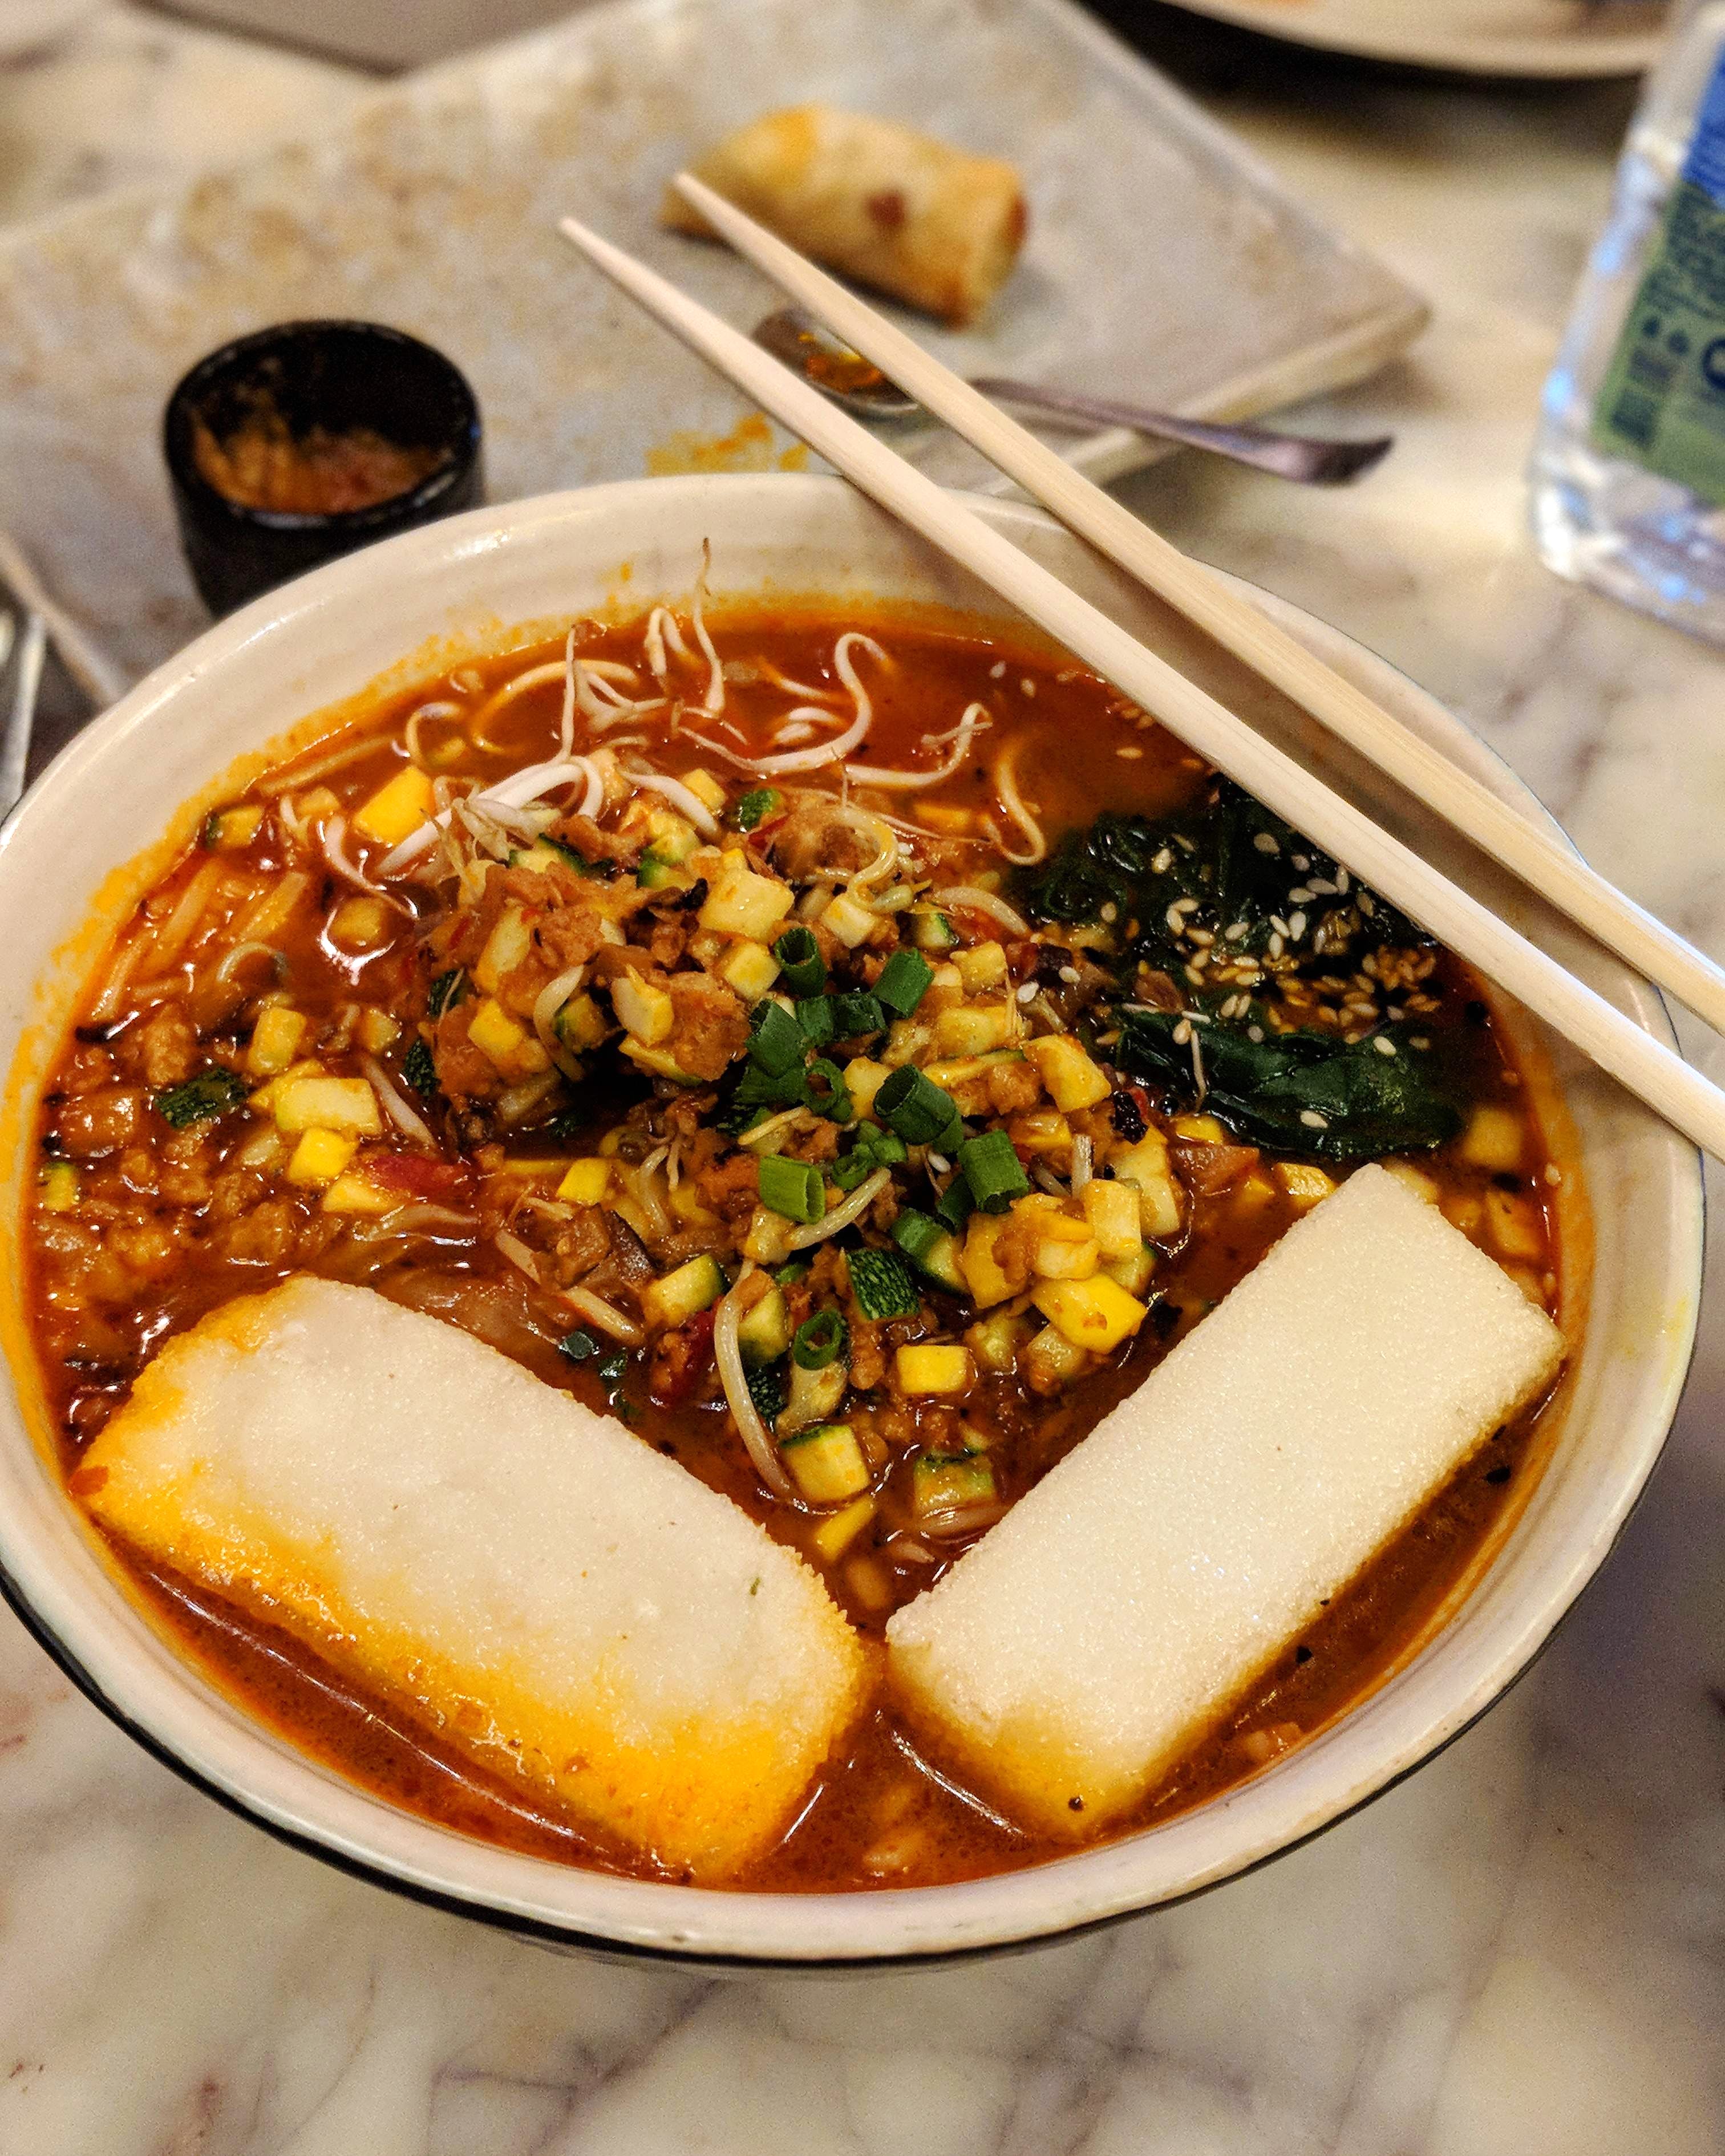 Dish,Food,Cuisine,Ingredient,Mapo doufu,Produce,Chinese food,Tofu,Curry,Meat